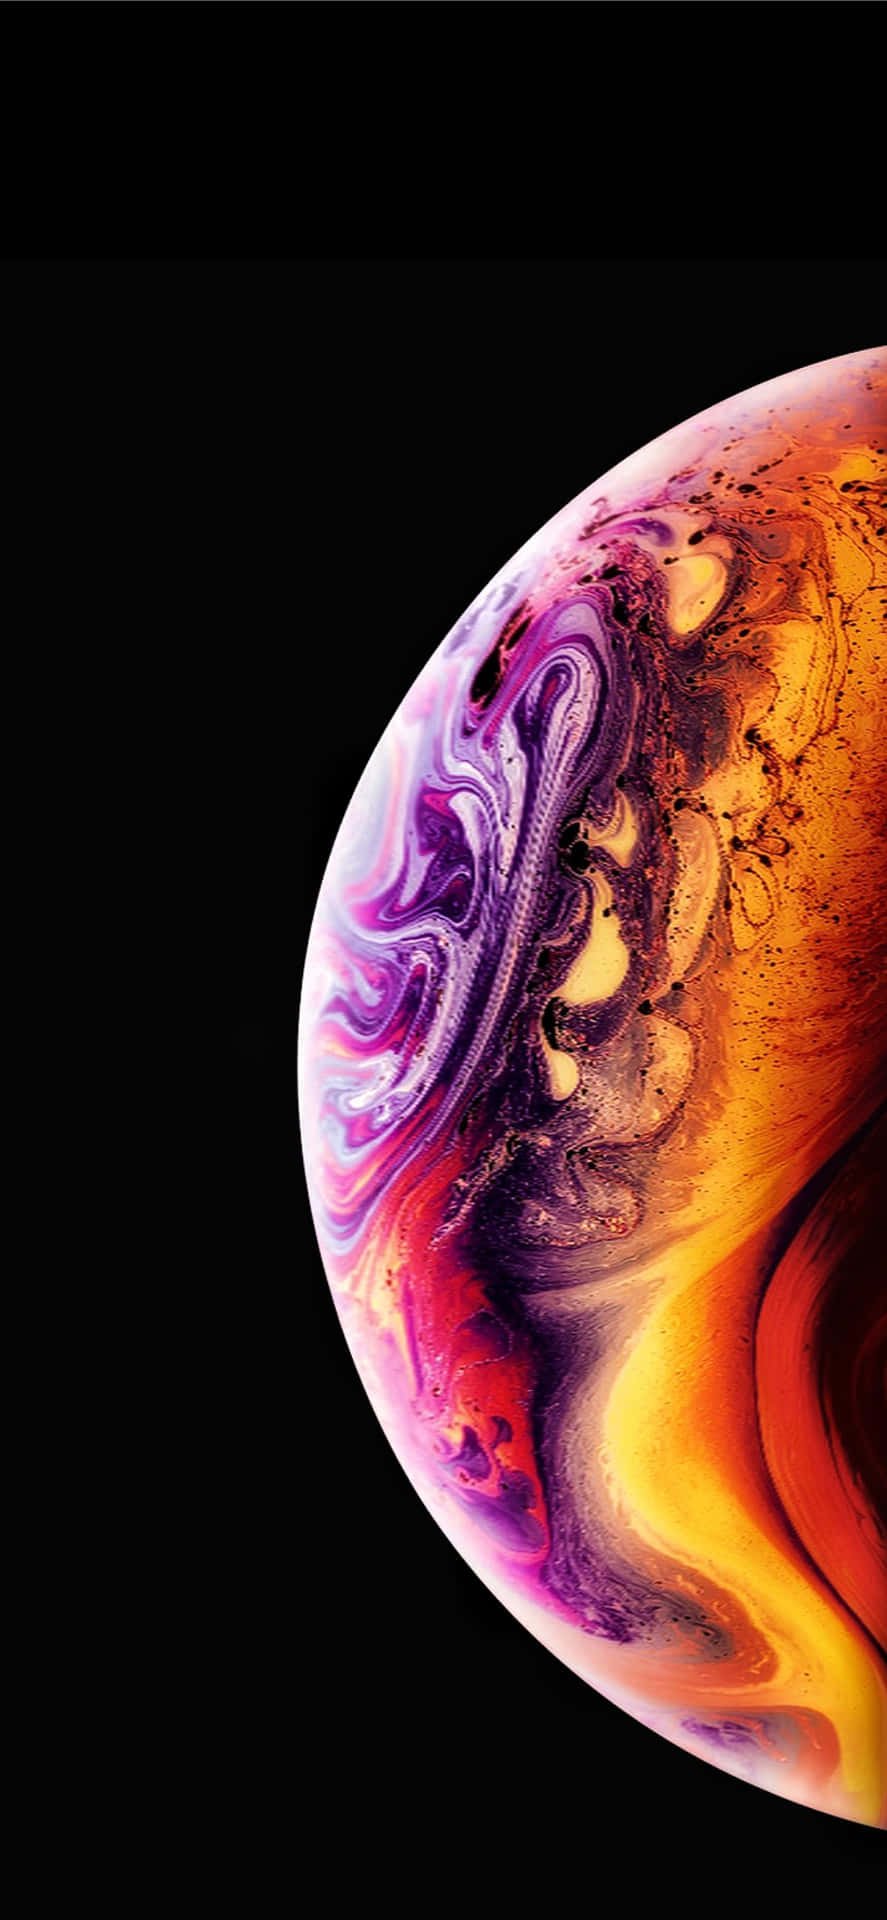 An Image Of An Apple Iphone Xs Max With A Colorful Swirl